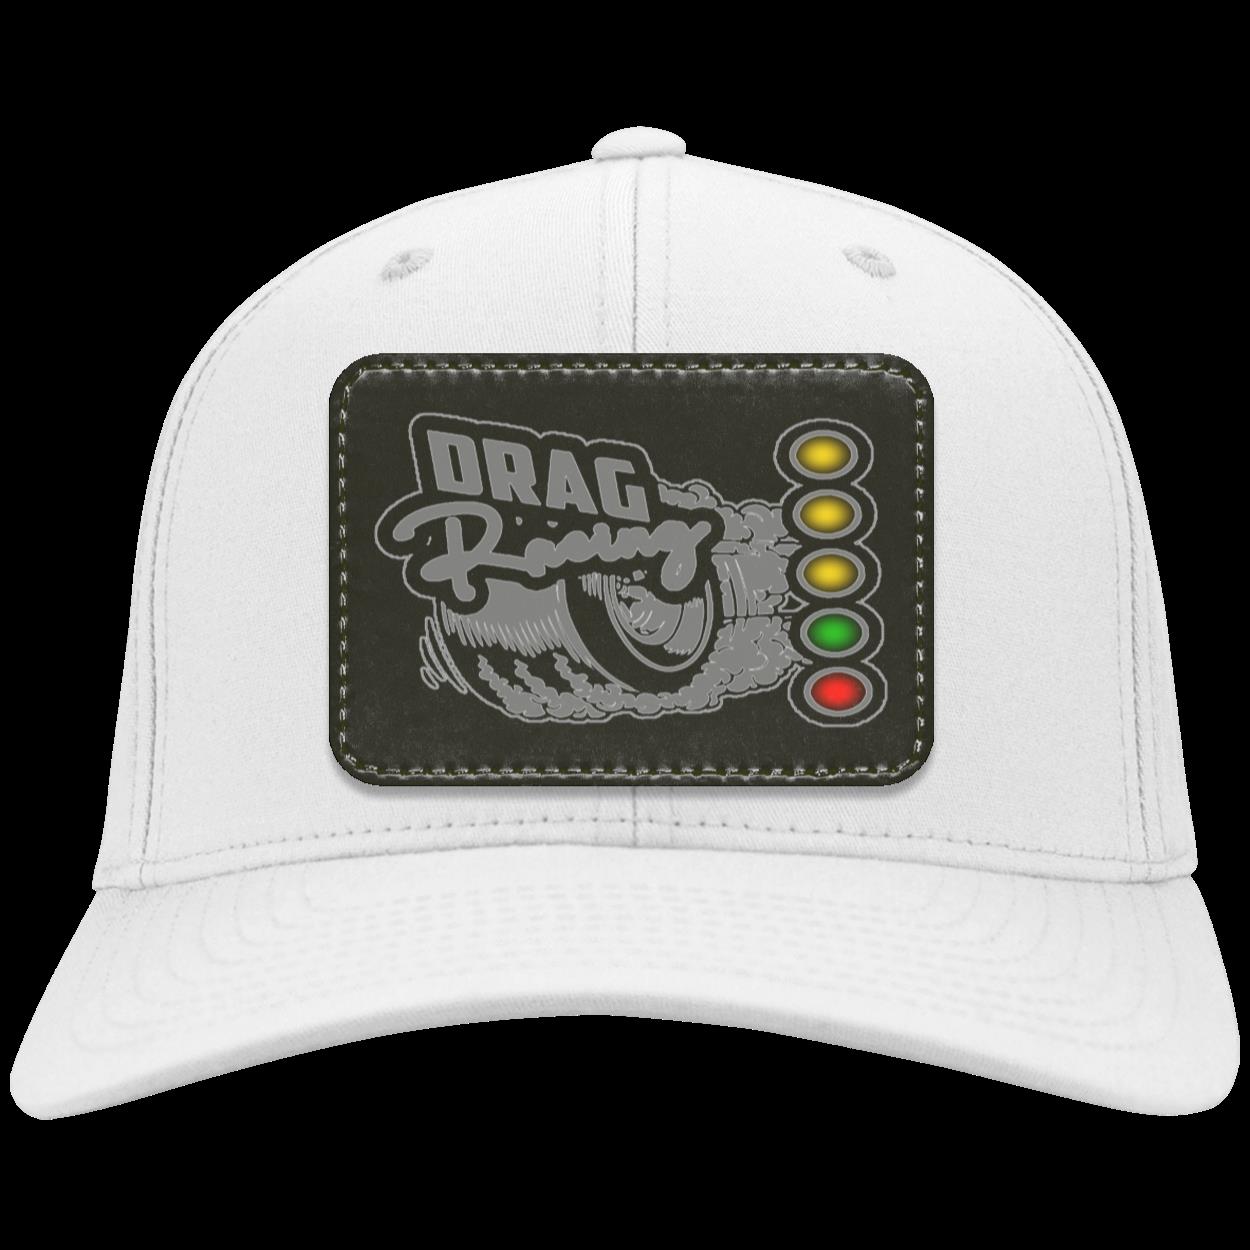 Drag Racing Patched Twill Cap V11